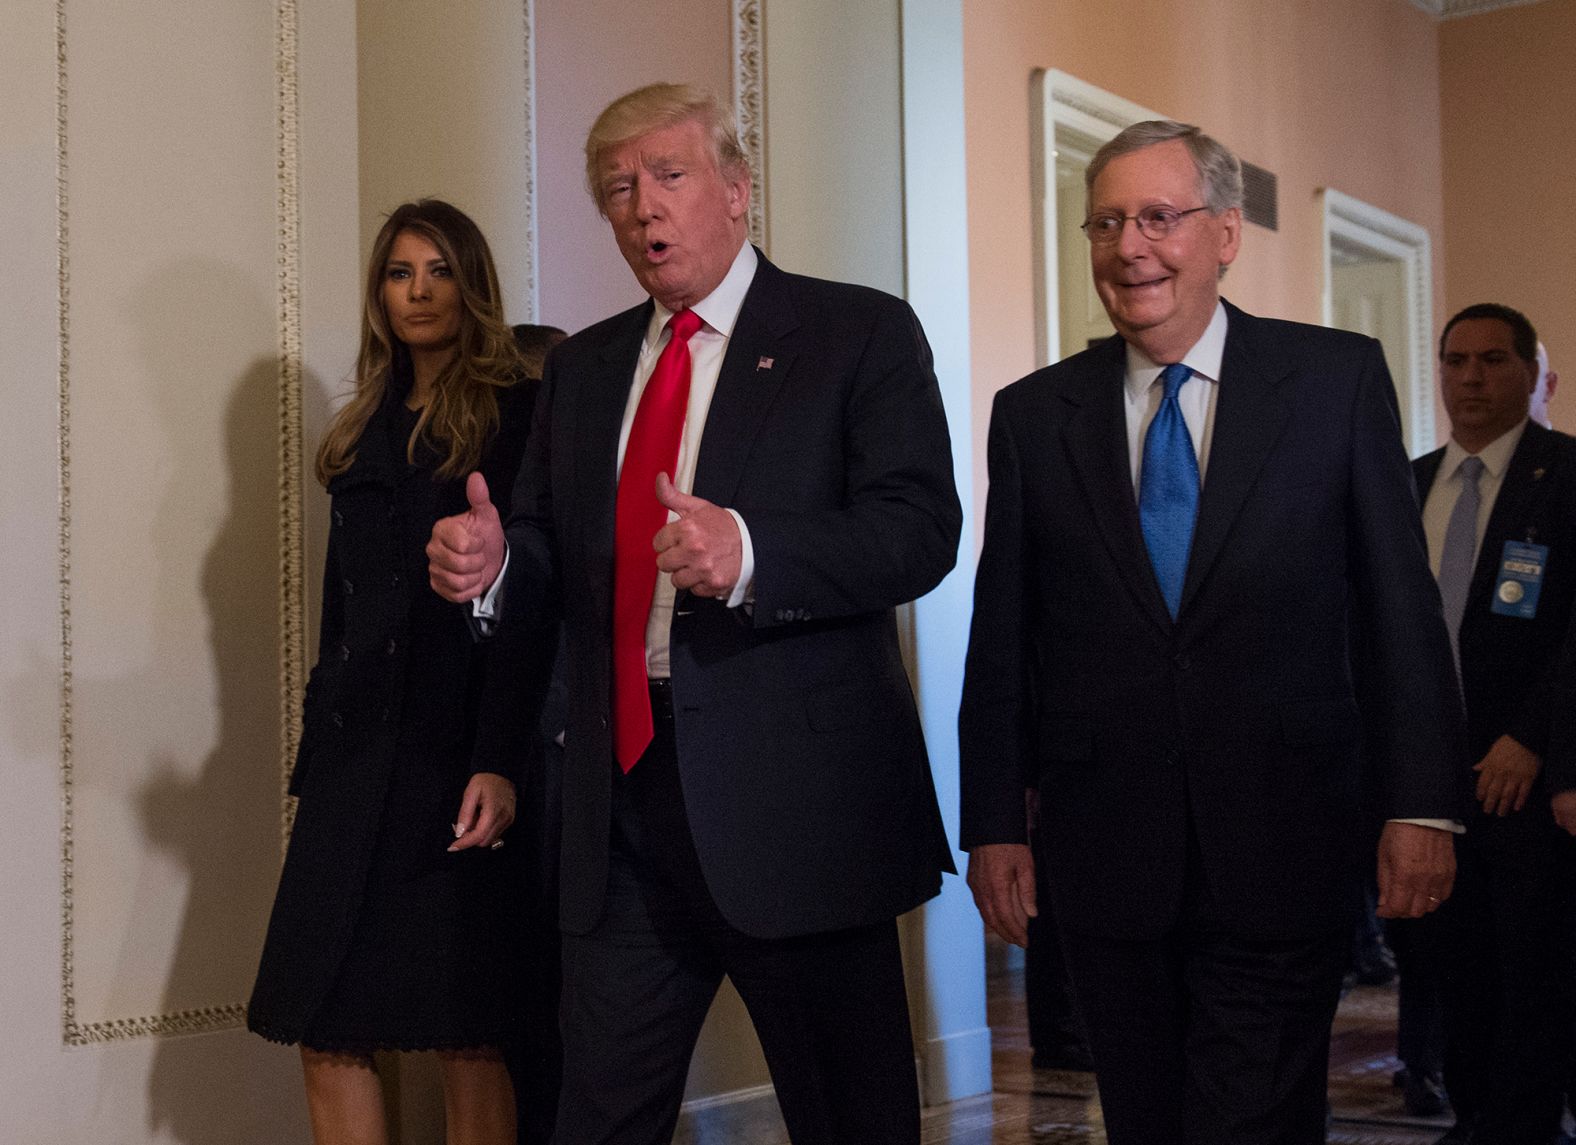 McConnell walks with President-elect Donald Trump and his wife, Melania, after a meeting at the Capitol in November 2016.